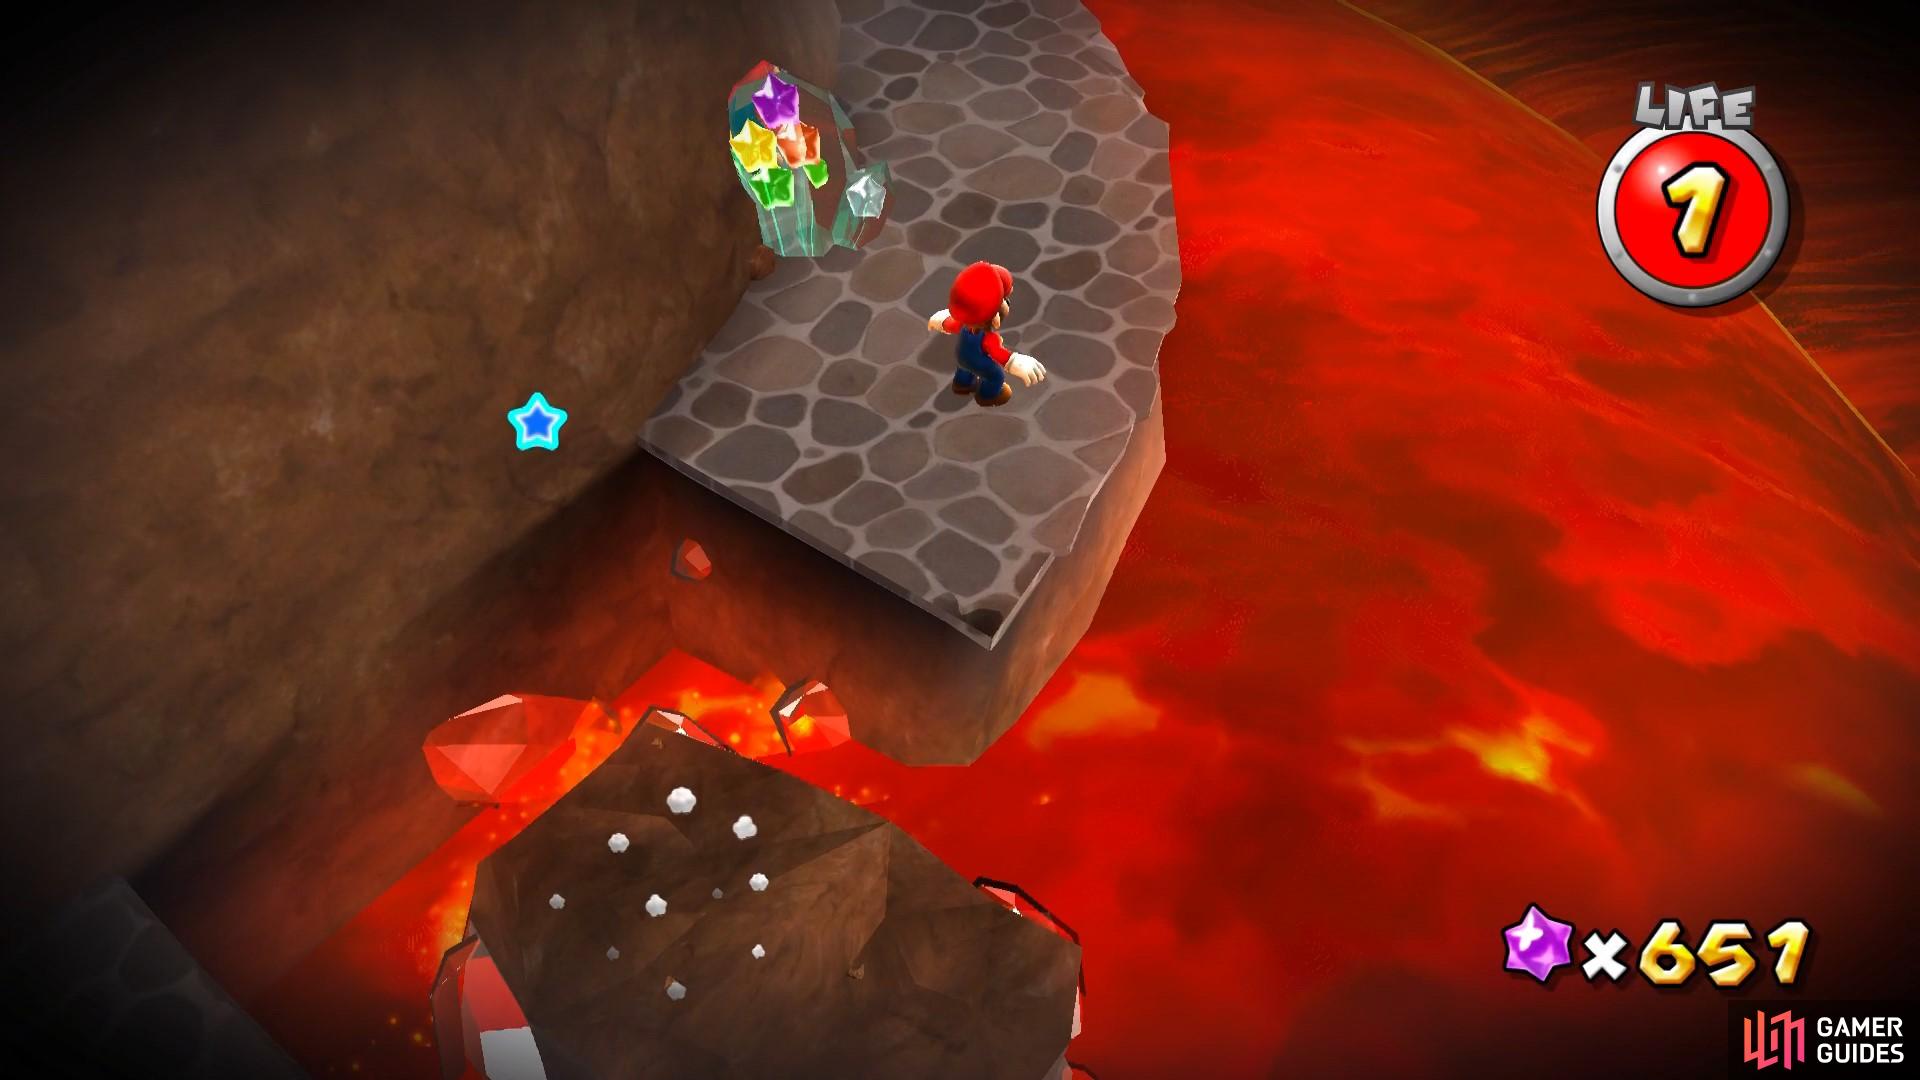 Make your way up the sinking spire and watch out for lava and boulders!